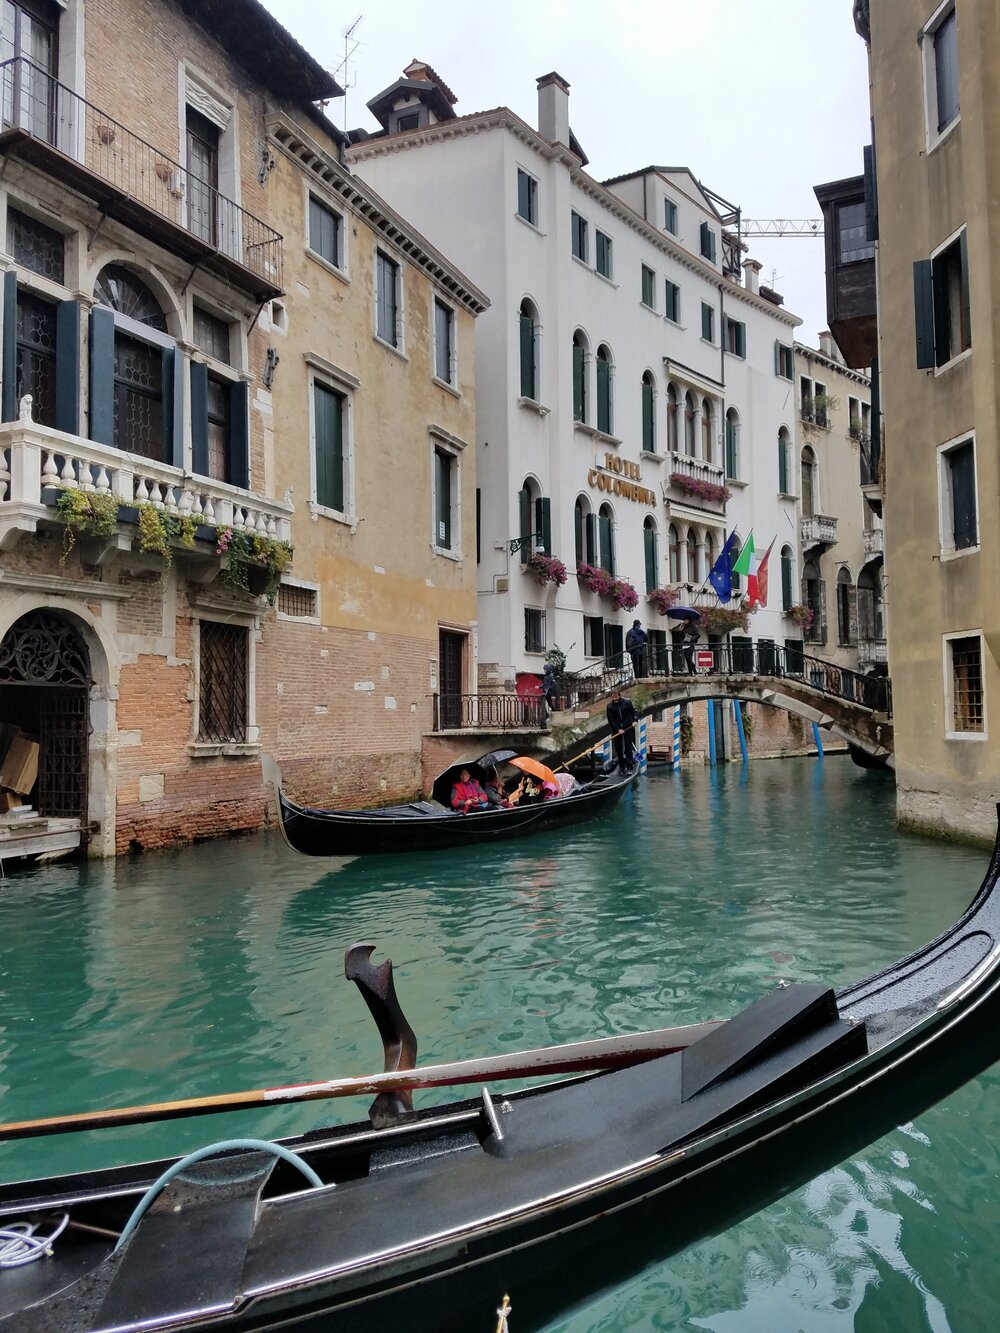 The ladies in this gondola where all singing :)